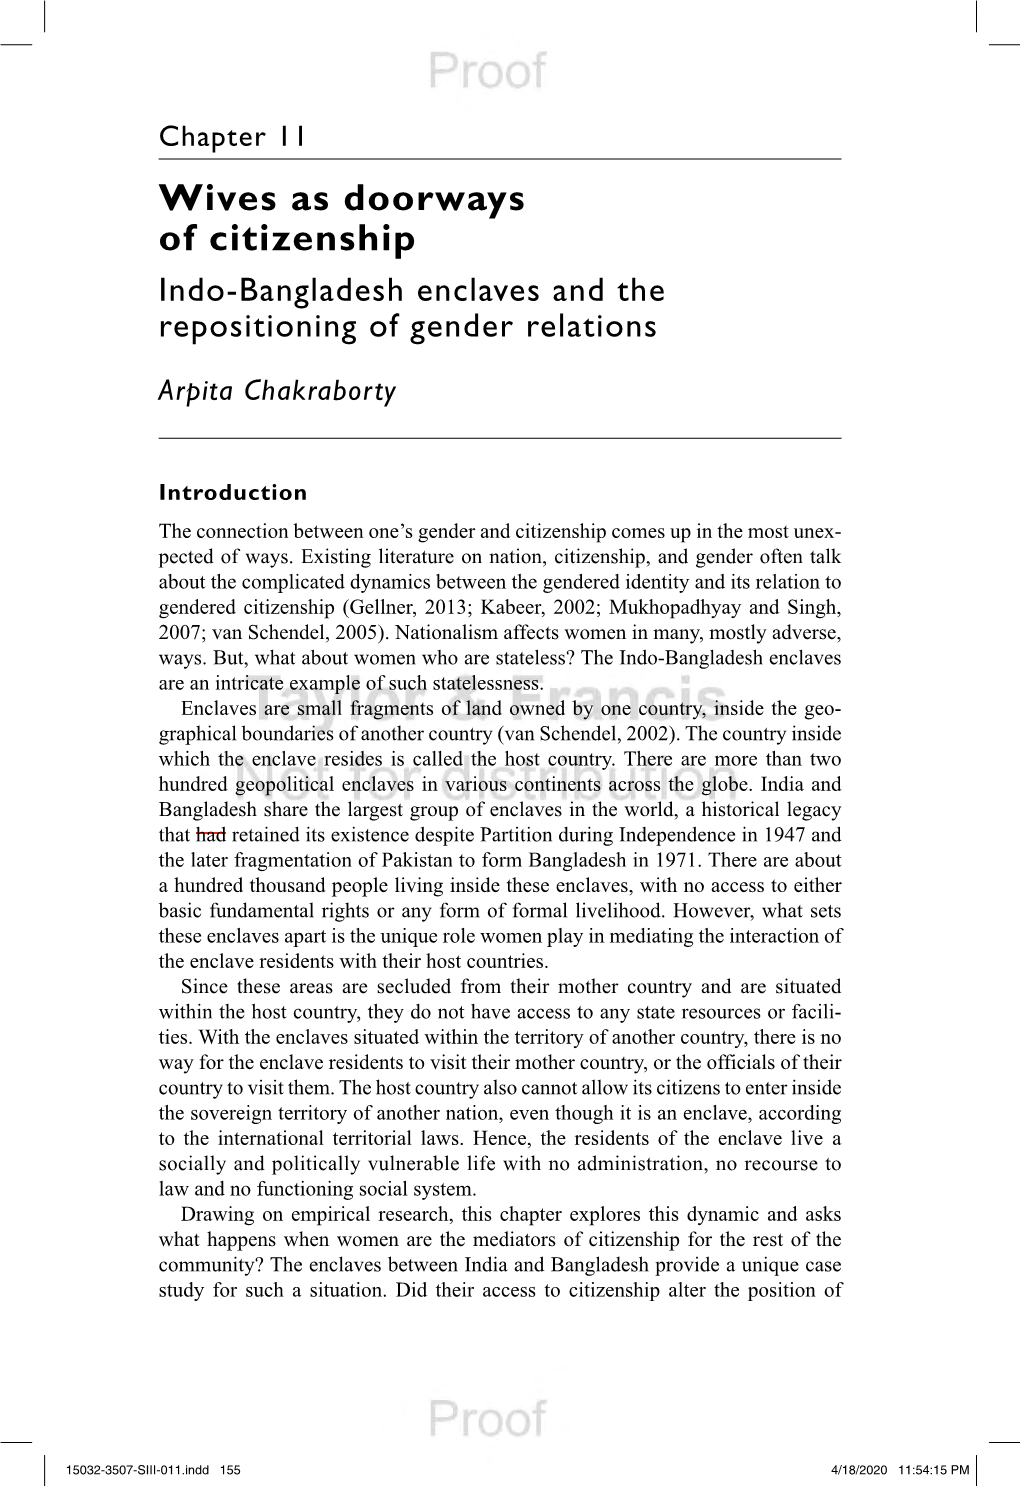 Wives As Doorways of Citizenship Indo-Bangladesh Enclaves and the Repositioning of Gender Relations